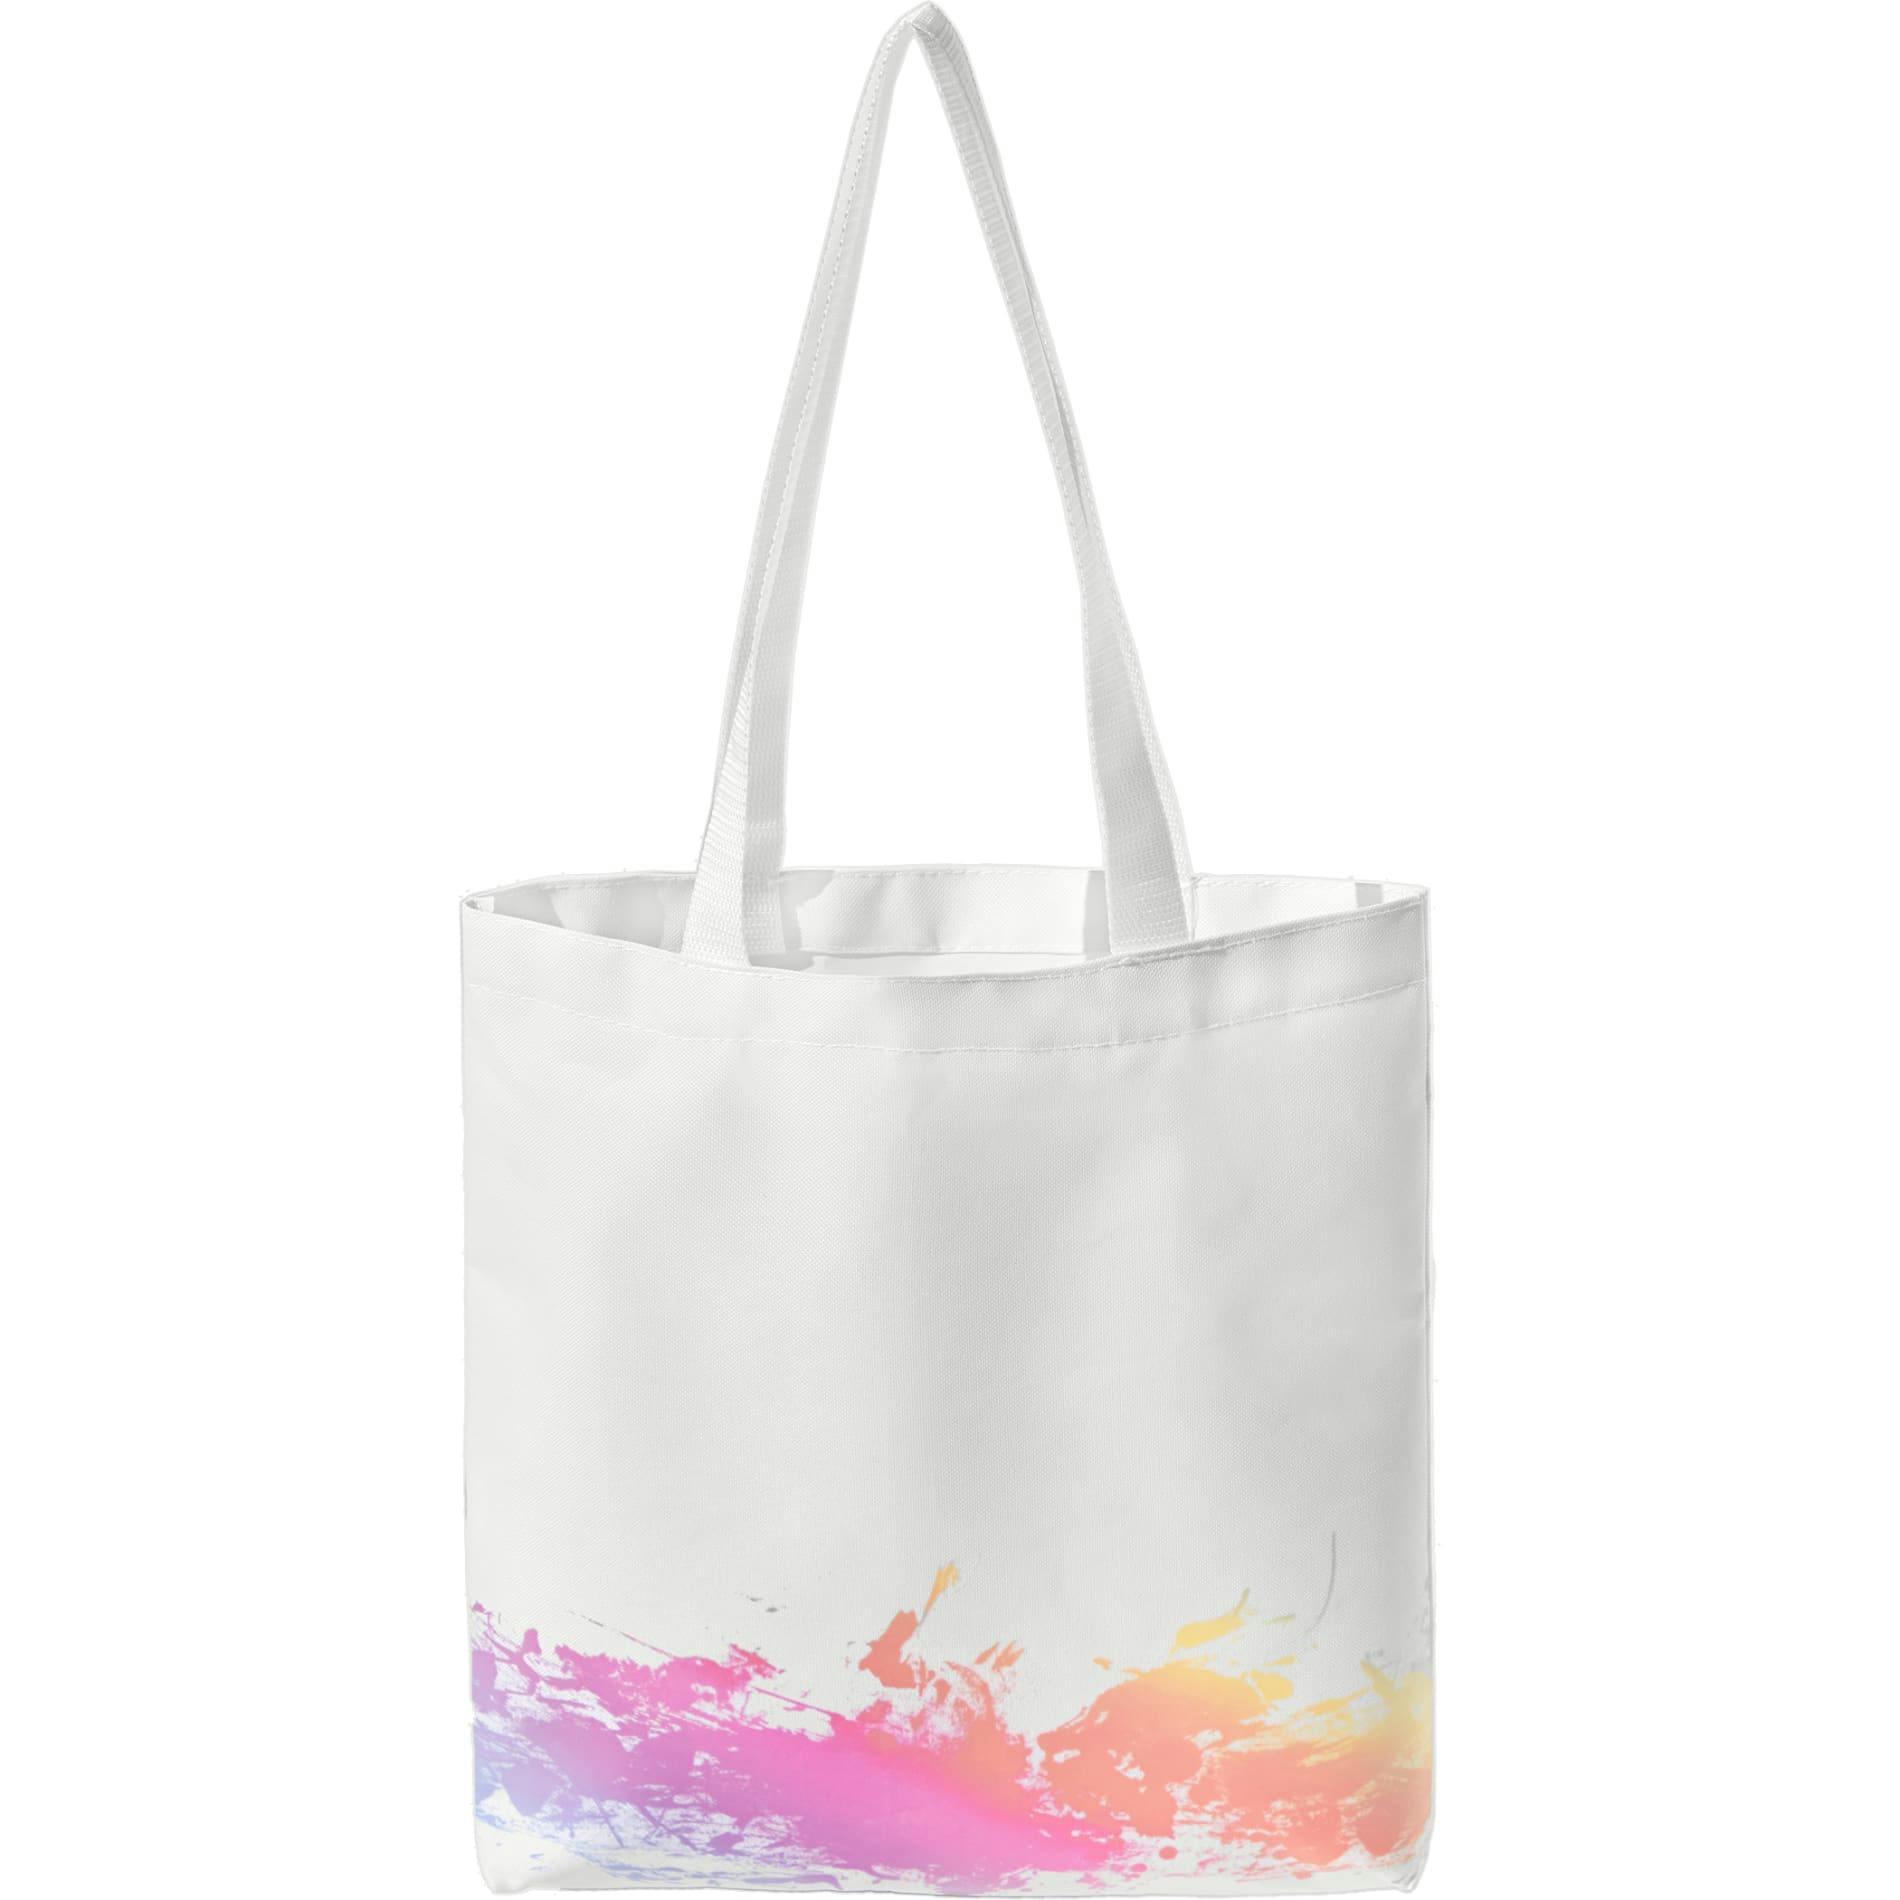 UV INK Convention Tote - additional Image 6